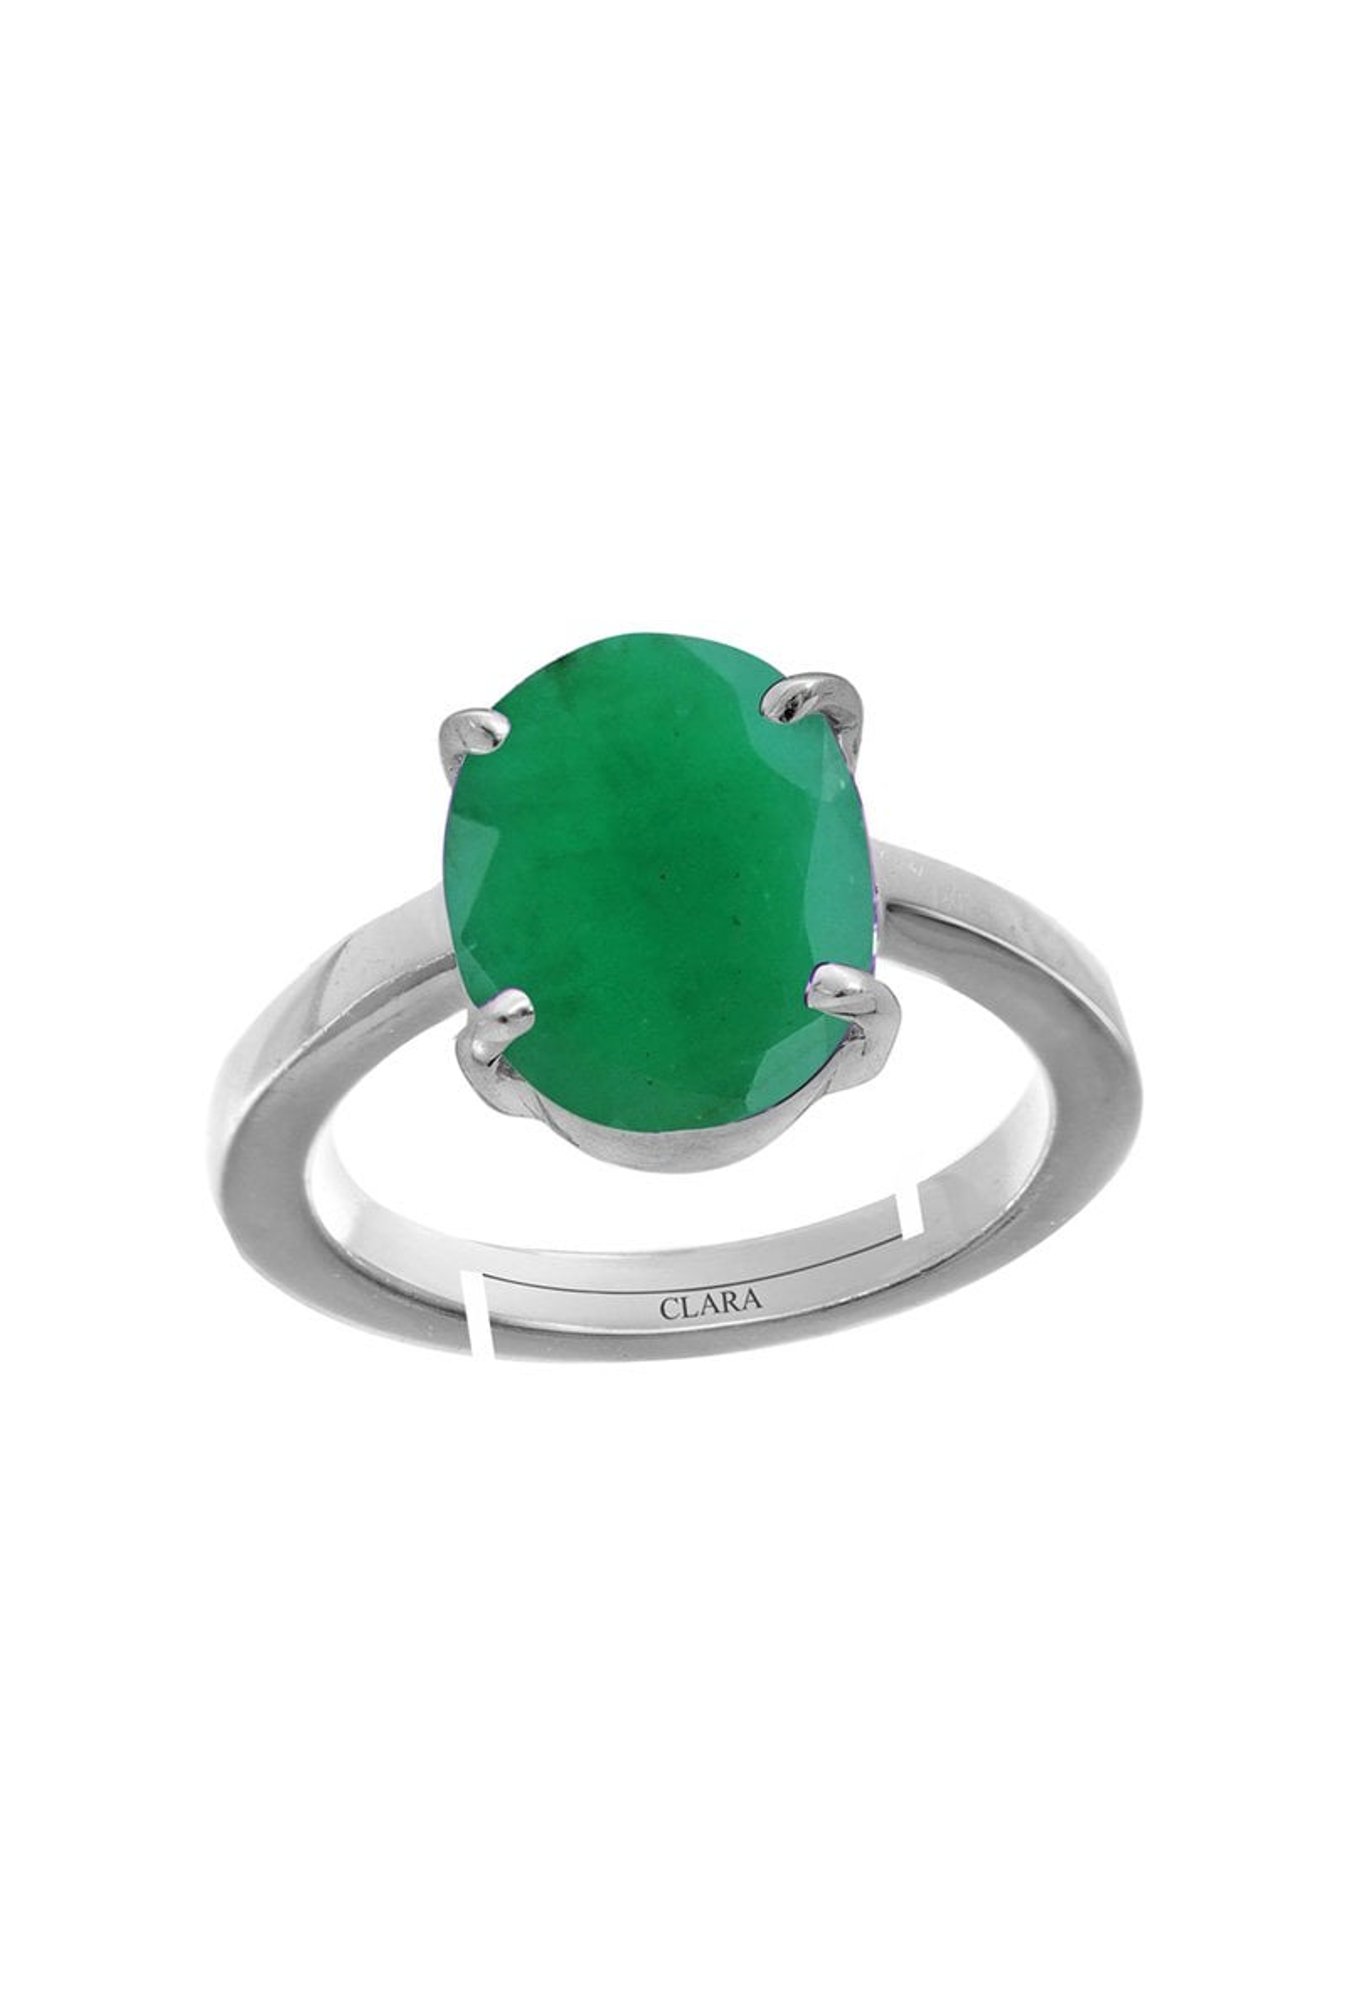 Three in One Emerald and Silver 925 Rings Set.